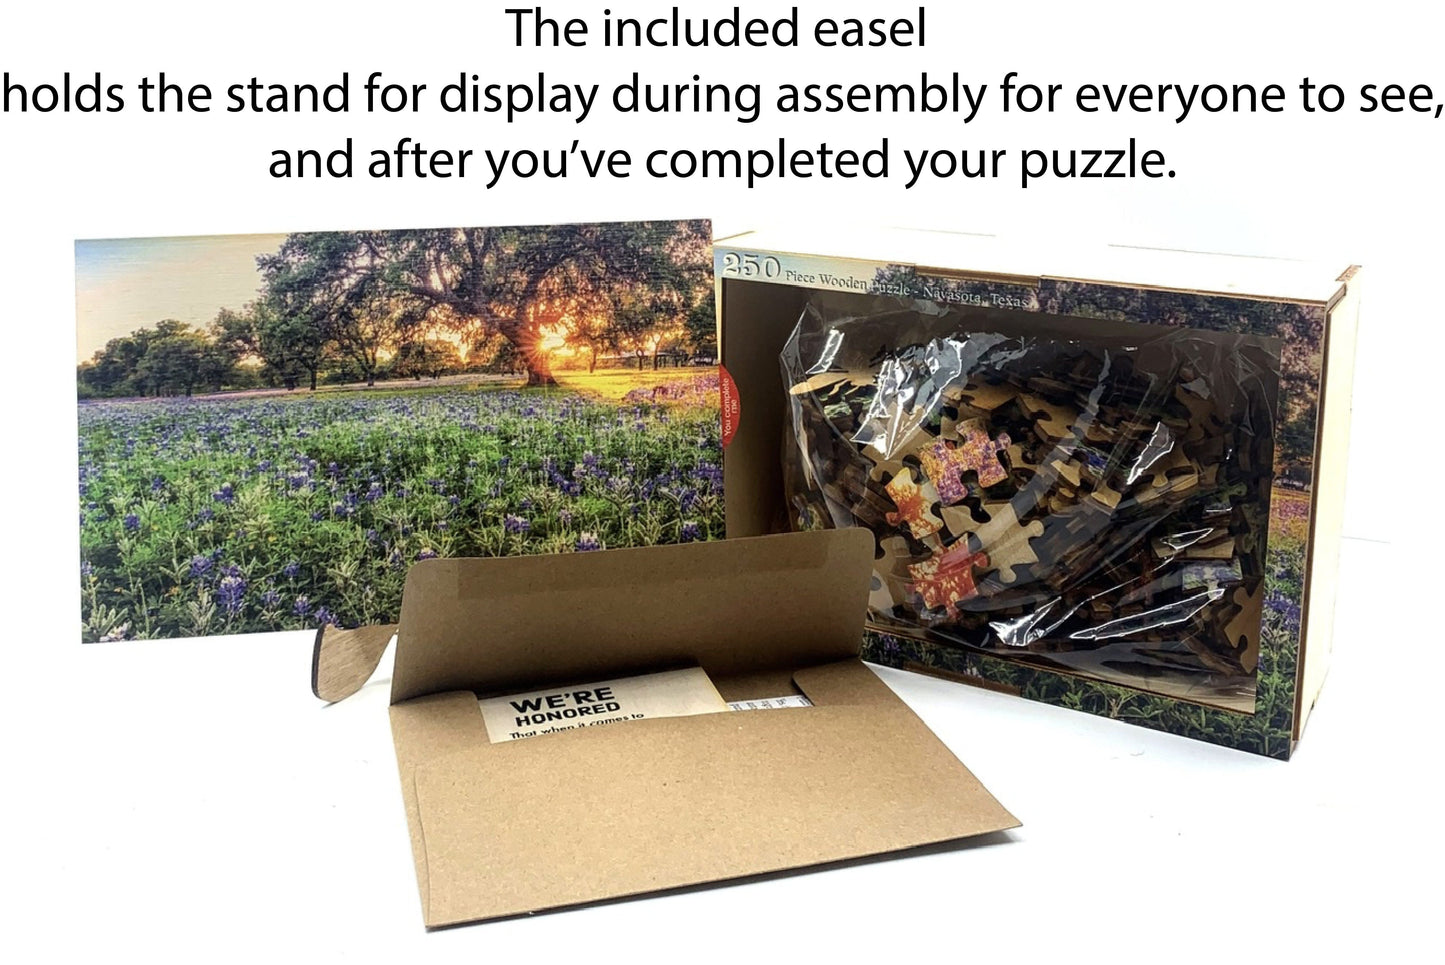 Wimberley Puzzle Company Artist Signature Series Jigsaw Puzzle Sea Turtle - Kemp's Ridley | National Parks Puzzle | 250, 500, 1000 Pieces